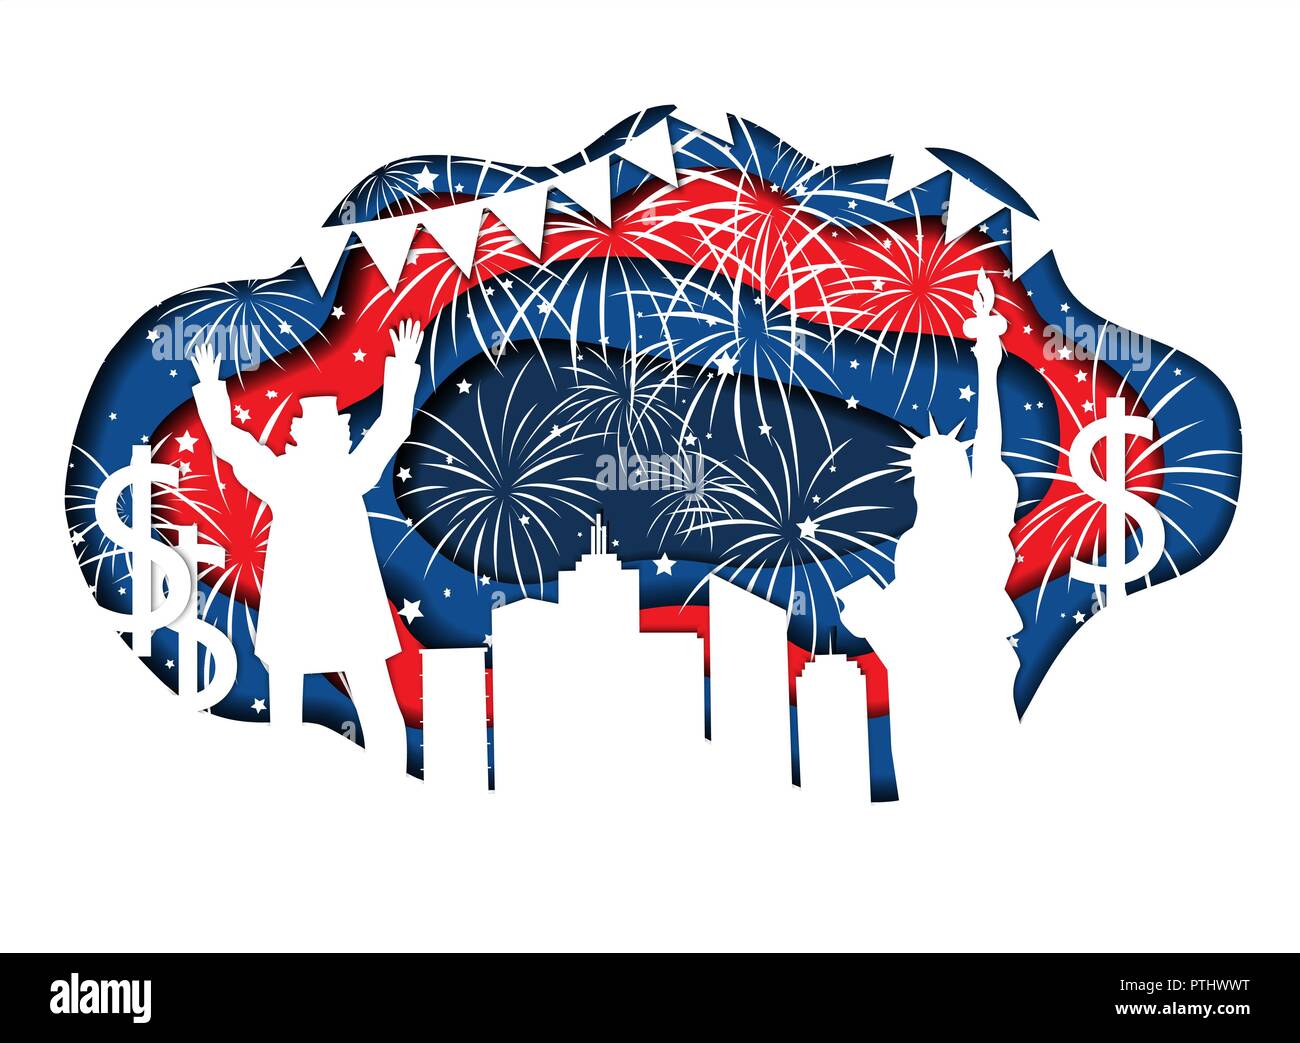 Stylish paper cut banner for Independence Day July 4 USA with Statue of Liberty, Uncle Sam, lights, stars, and city silhouette. Vector illustration. N Stock Vector